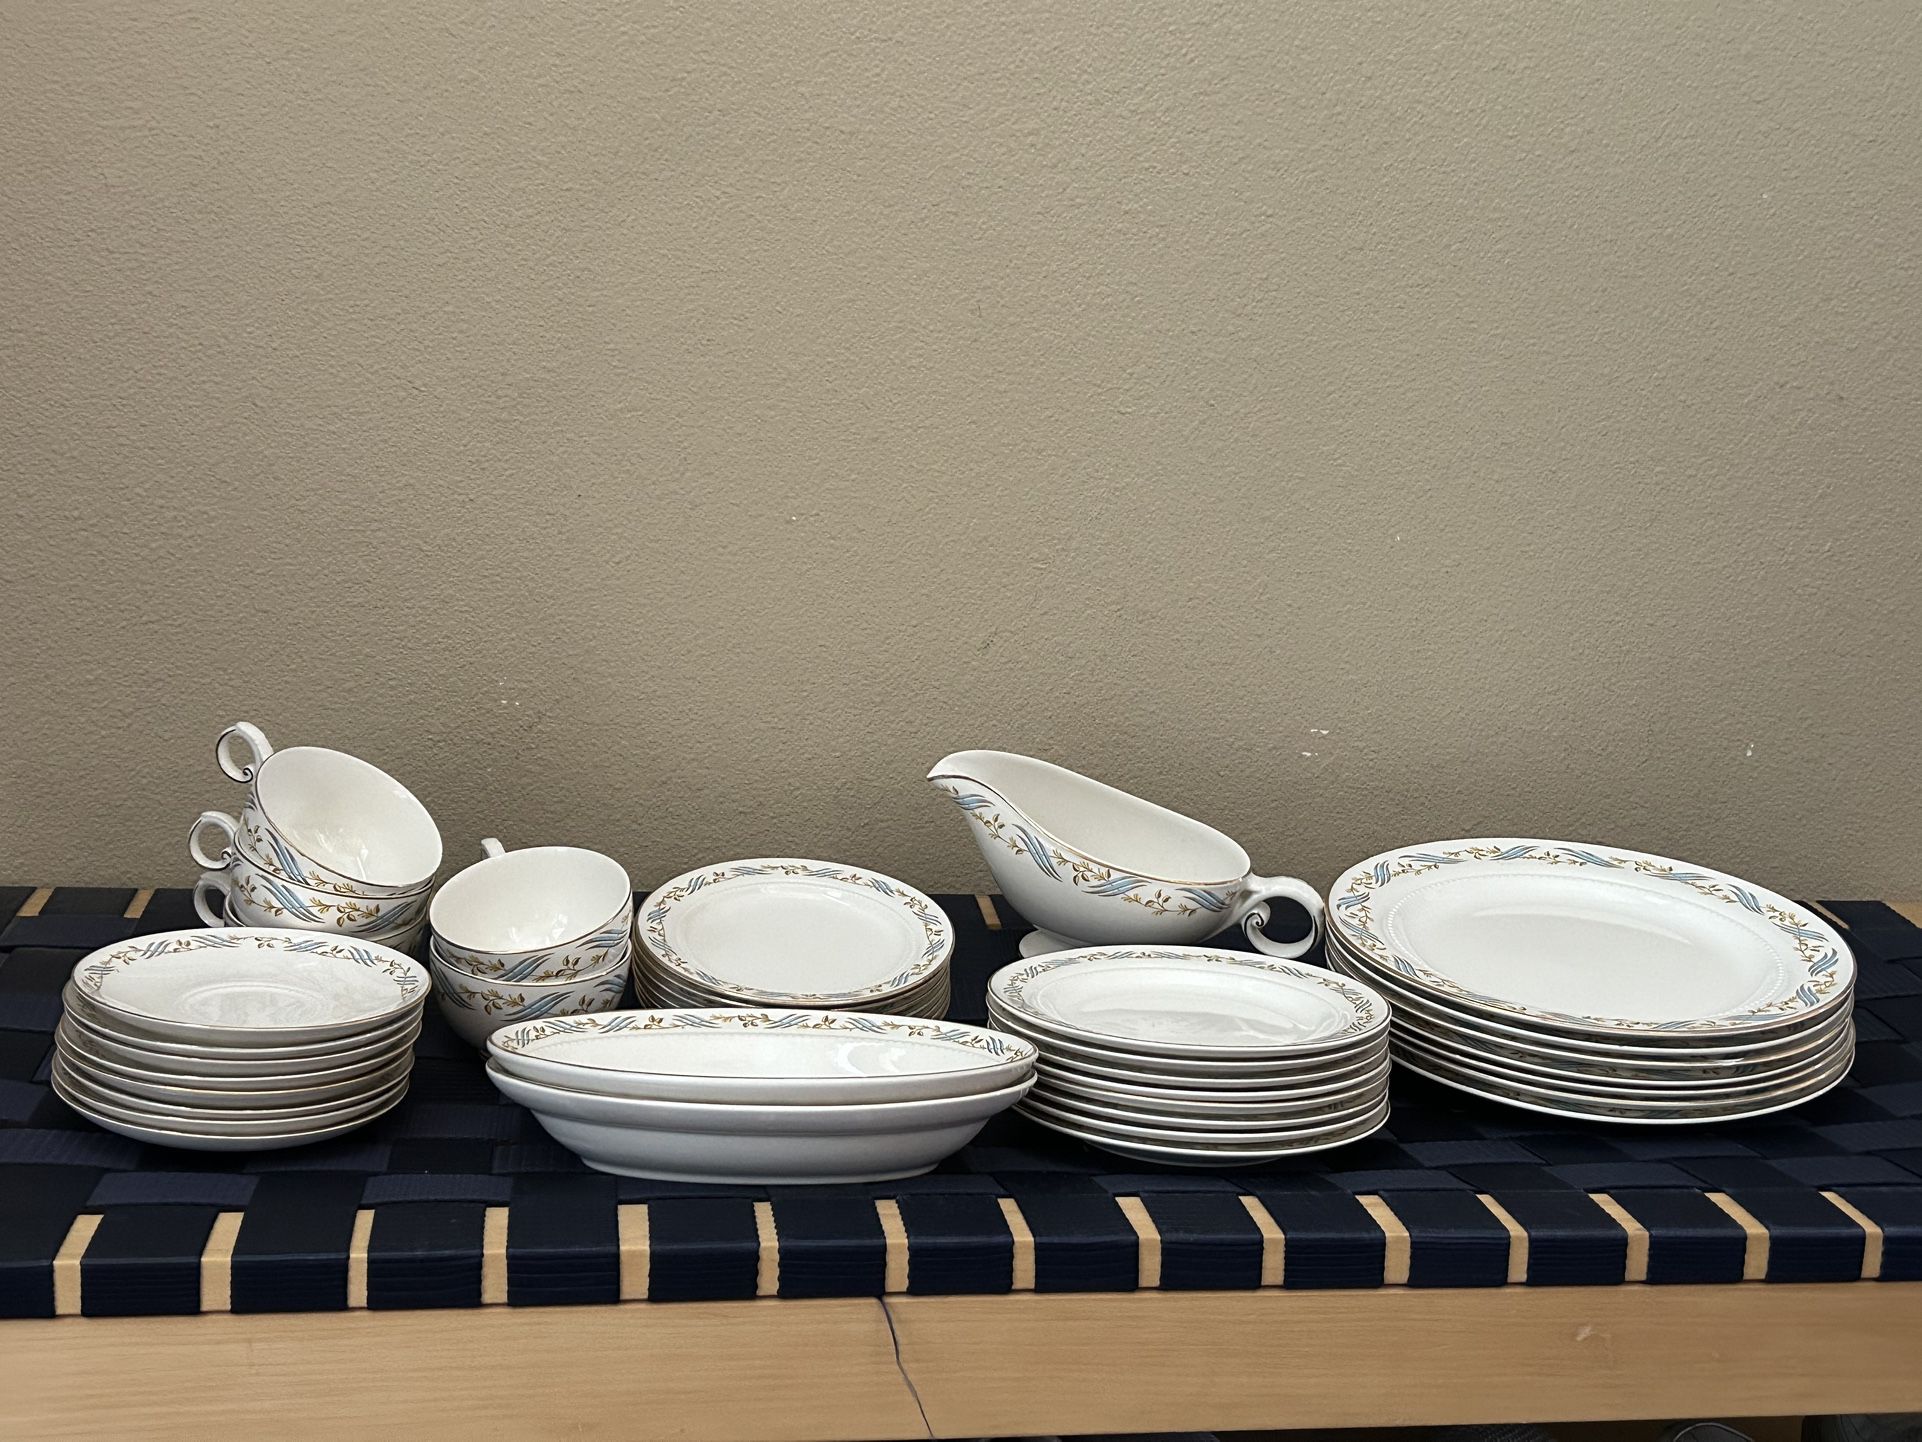 Harmony House “Arlington” Pattern Manufactured By Hall China, Mid-1900’s, Excellent Condition